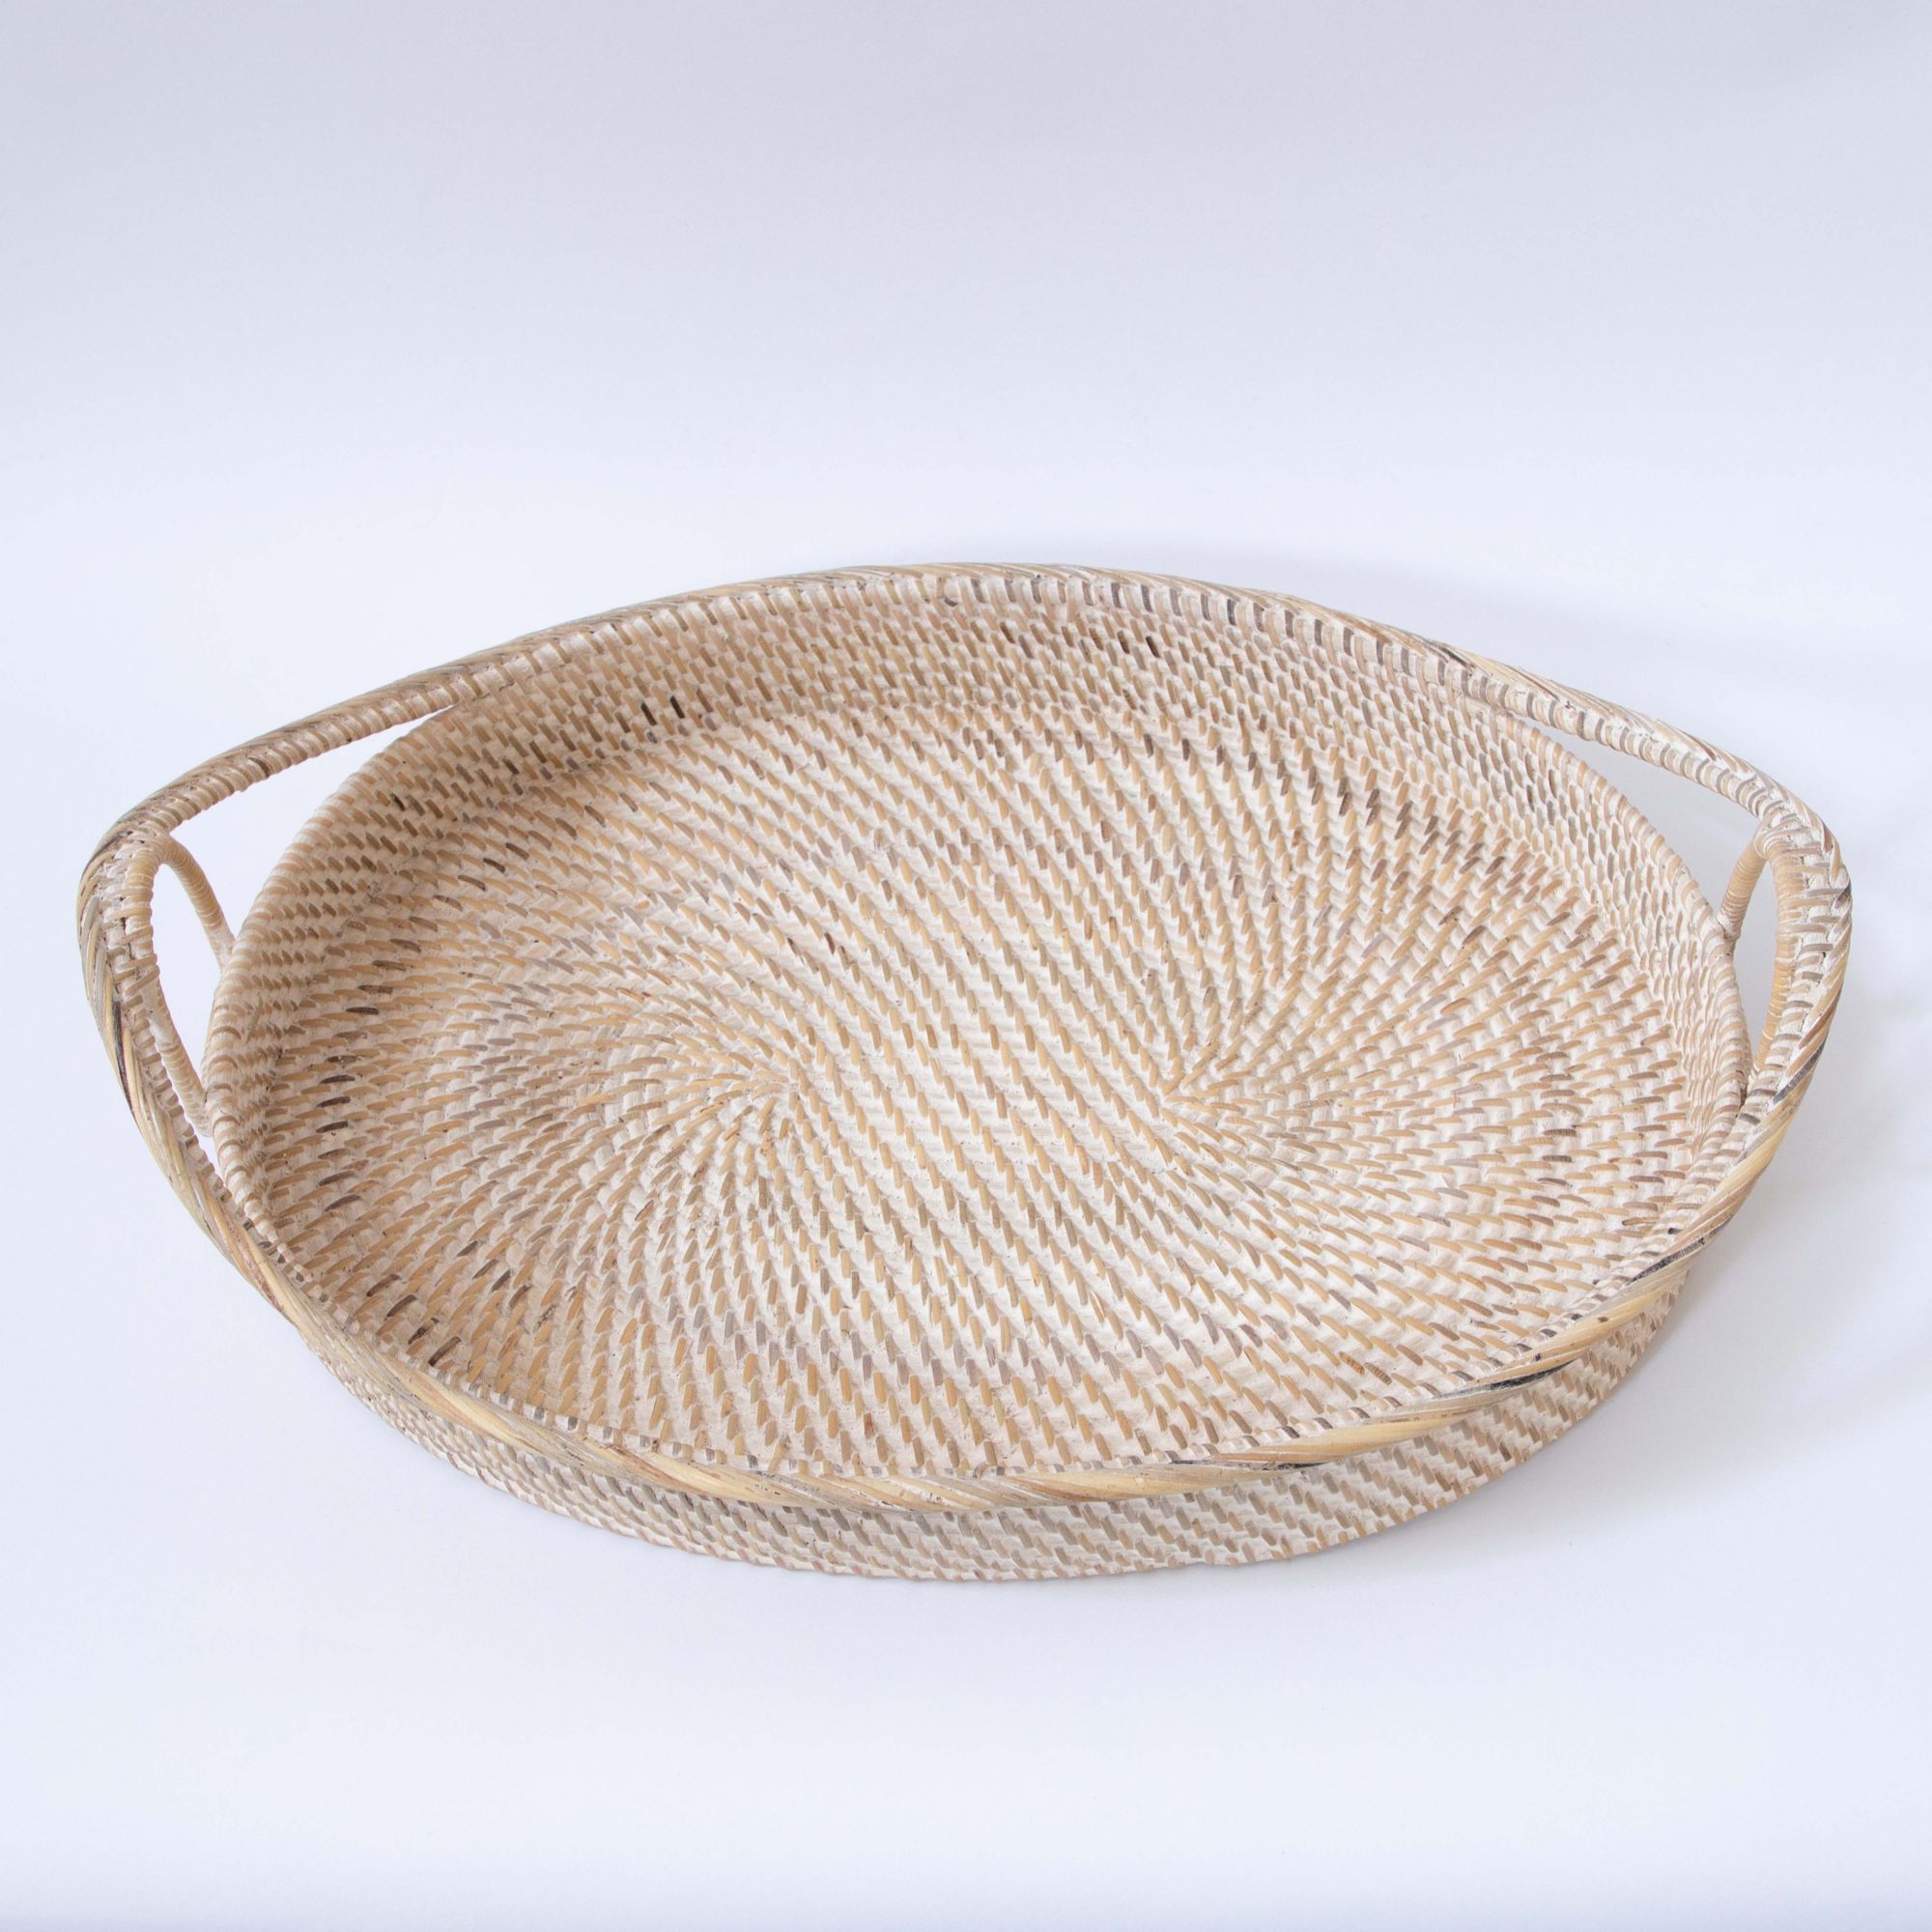 Hata Oval Tray With Decorative Celtic Handles - Beach Ivory